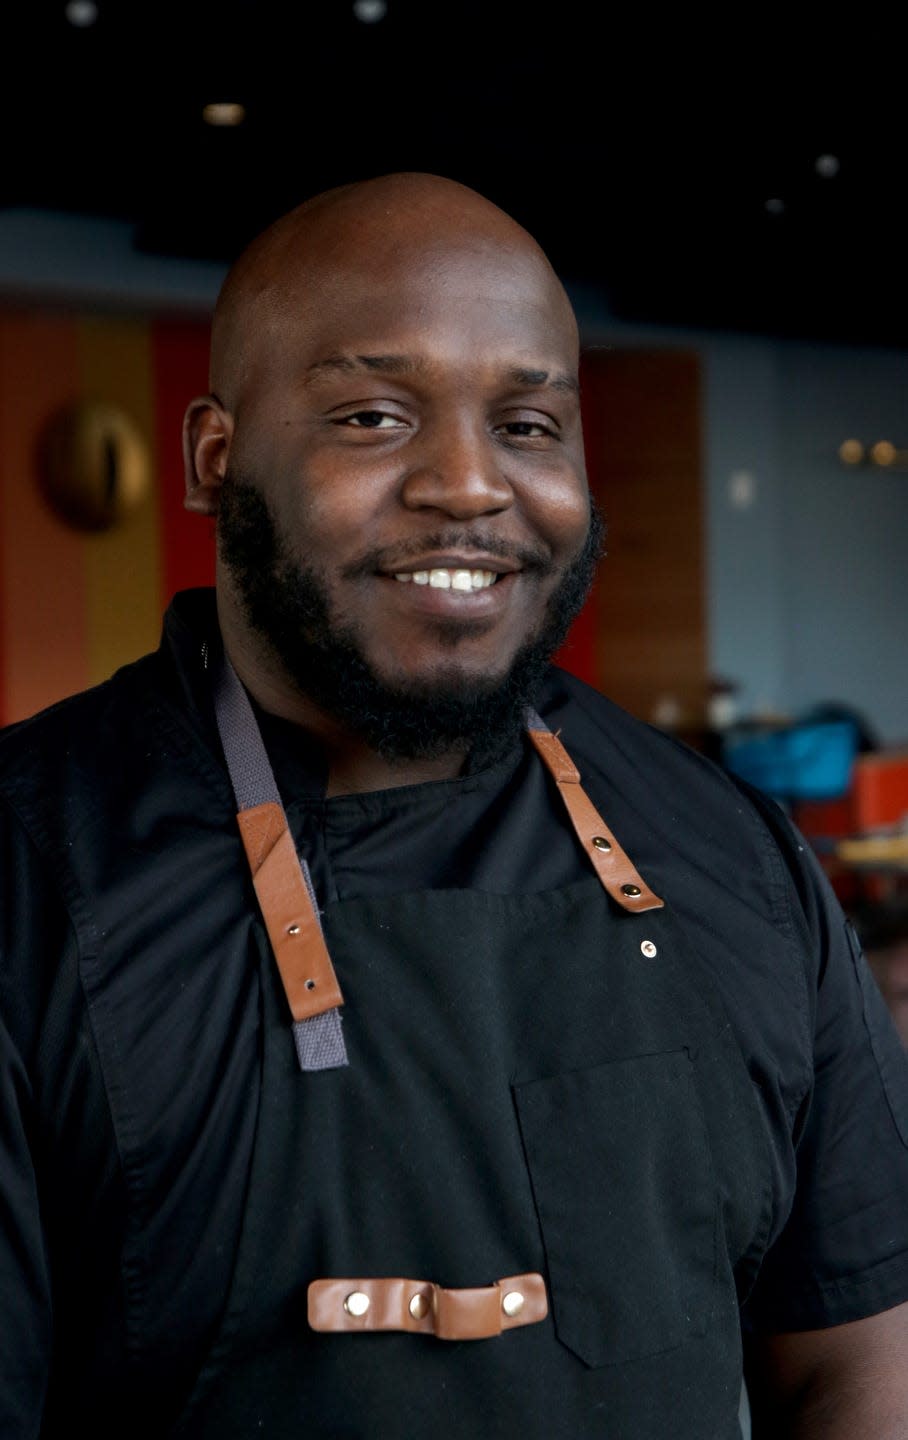 Executive chef Joel Eugene is in charge of the Blu Violet restaurant atop the new Aloft hotel in Providence's Innovation District. He most recently was executive sous chef at the Newport Marriott.